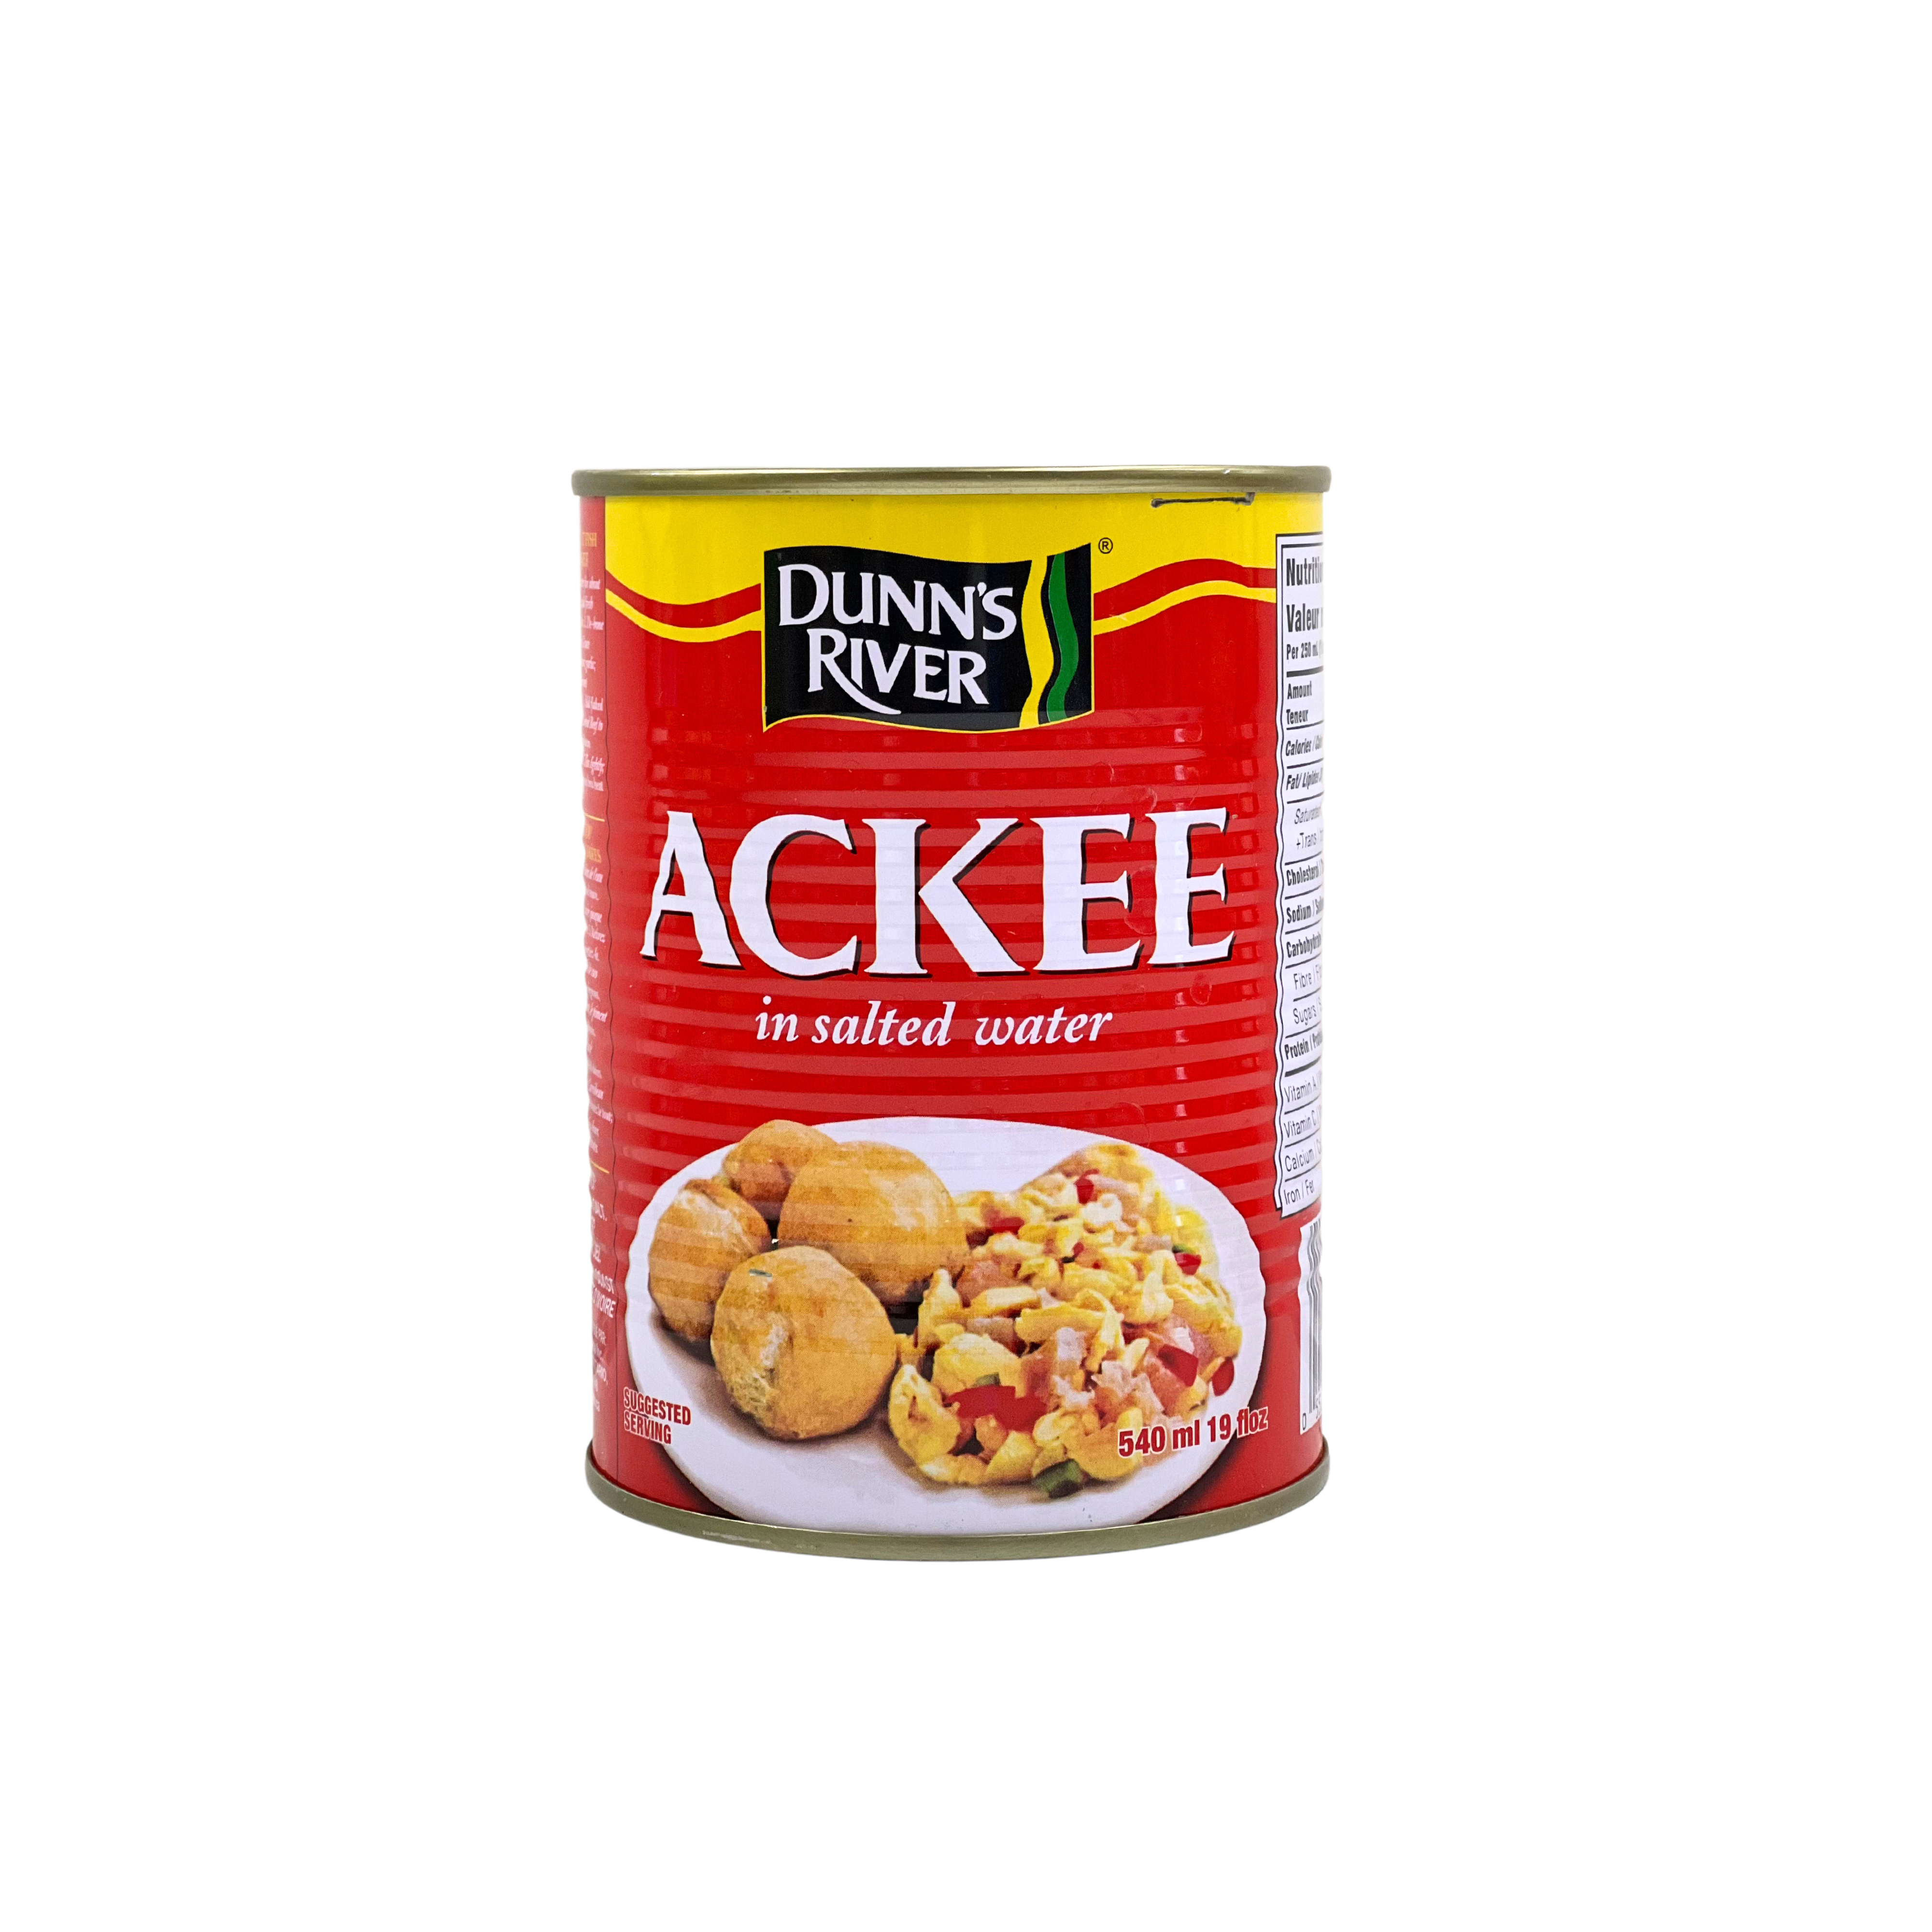 Dunns River Ackee